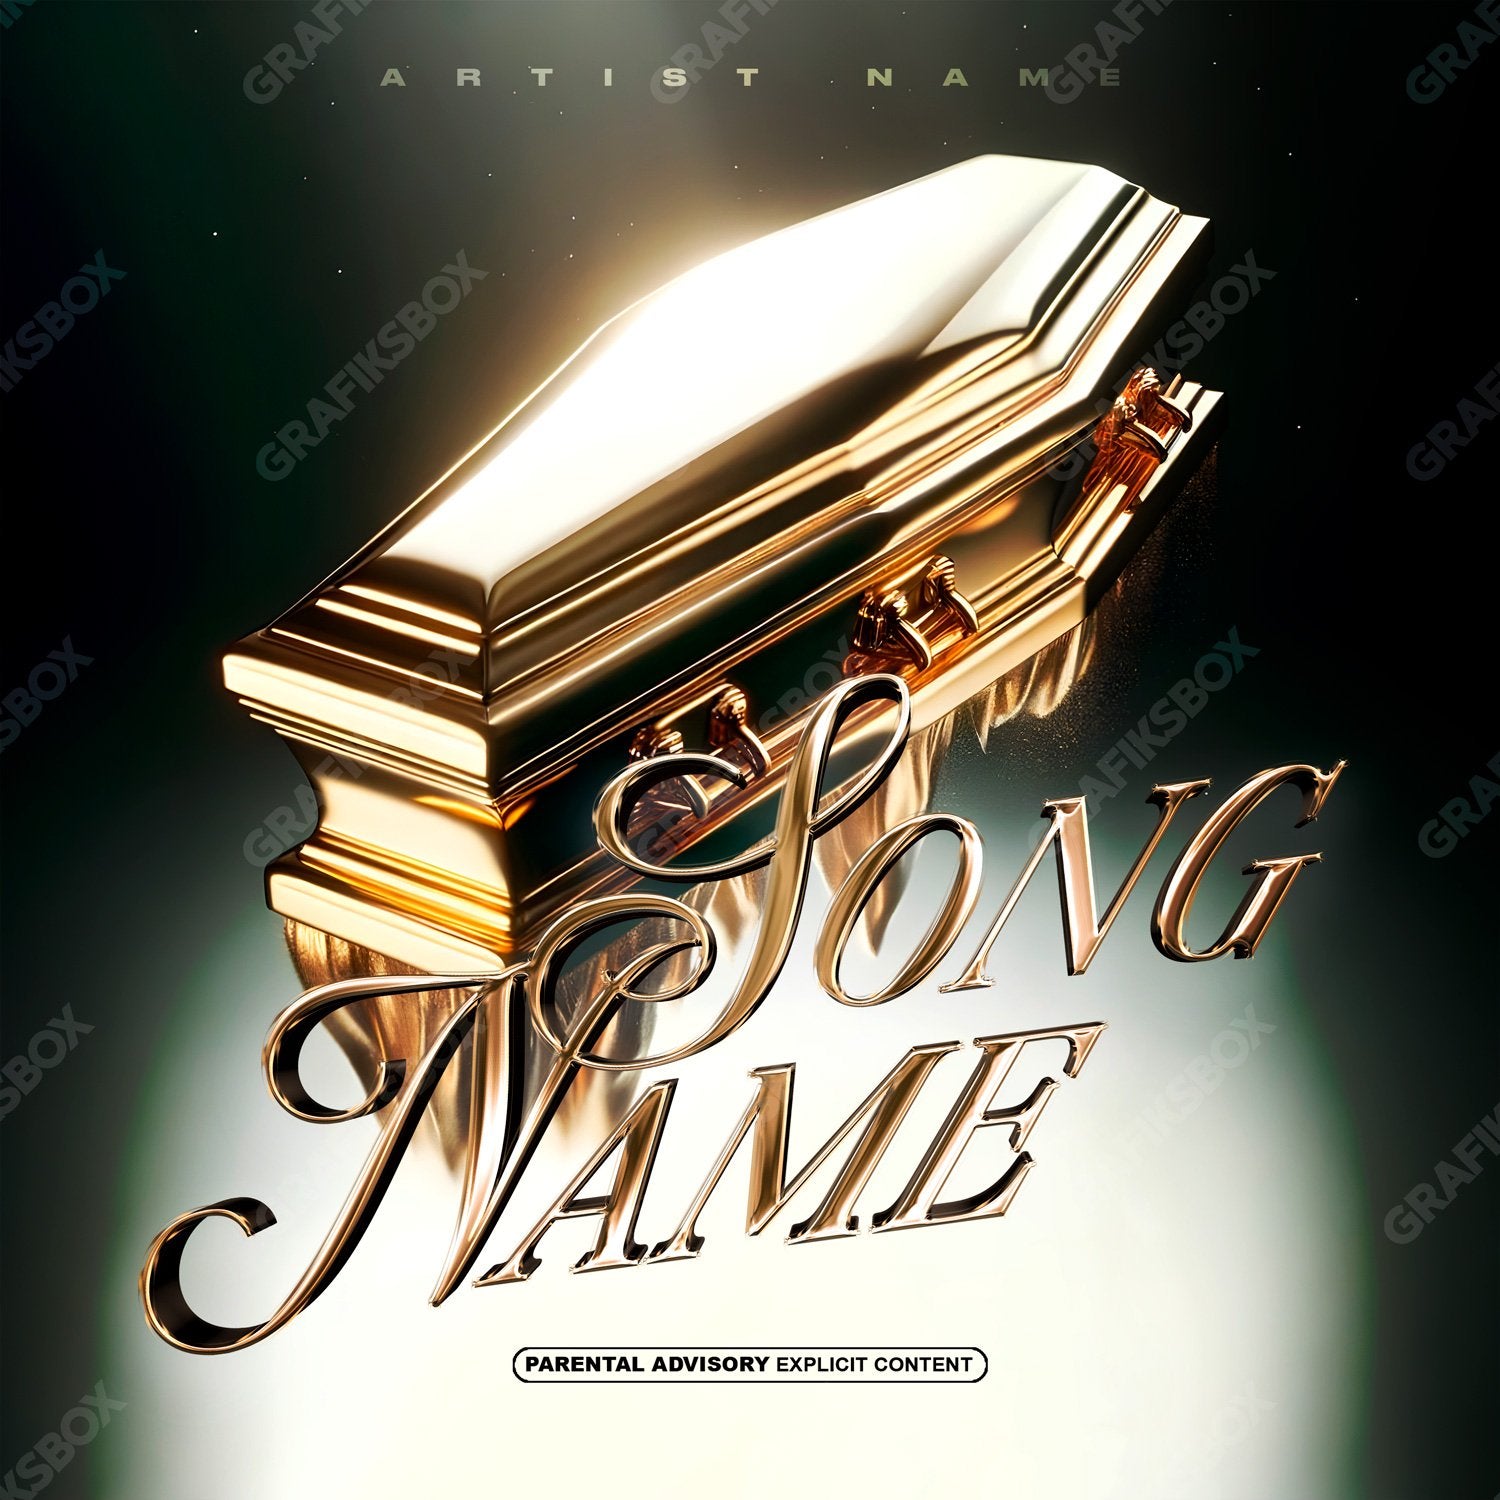 Gold tomb premade cover art